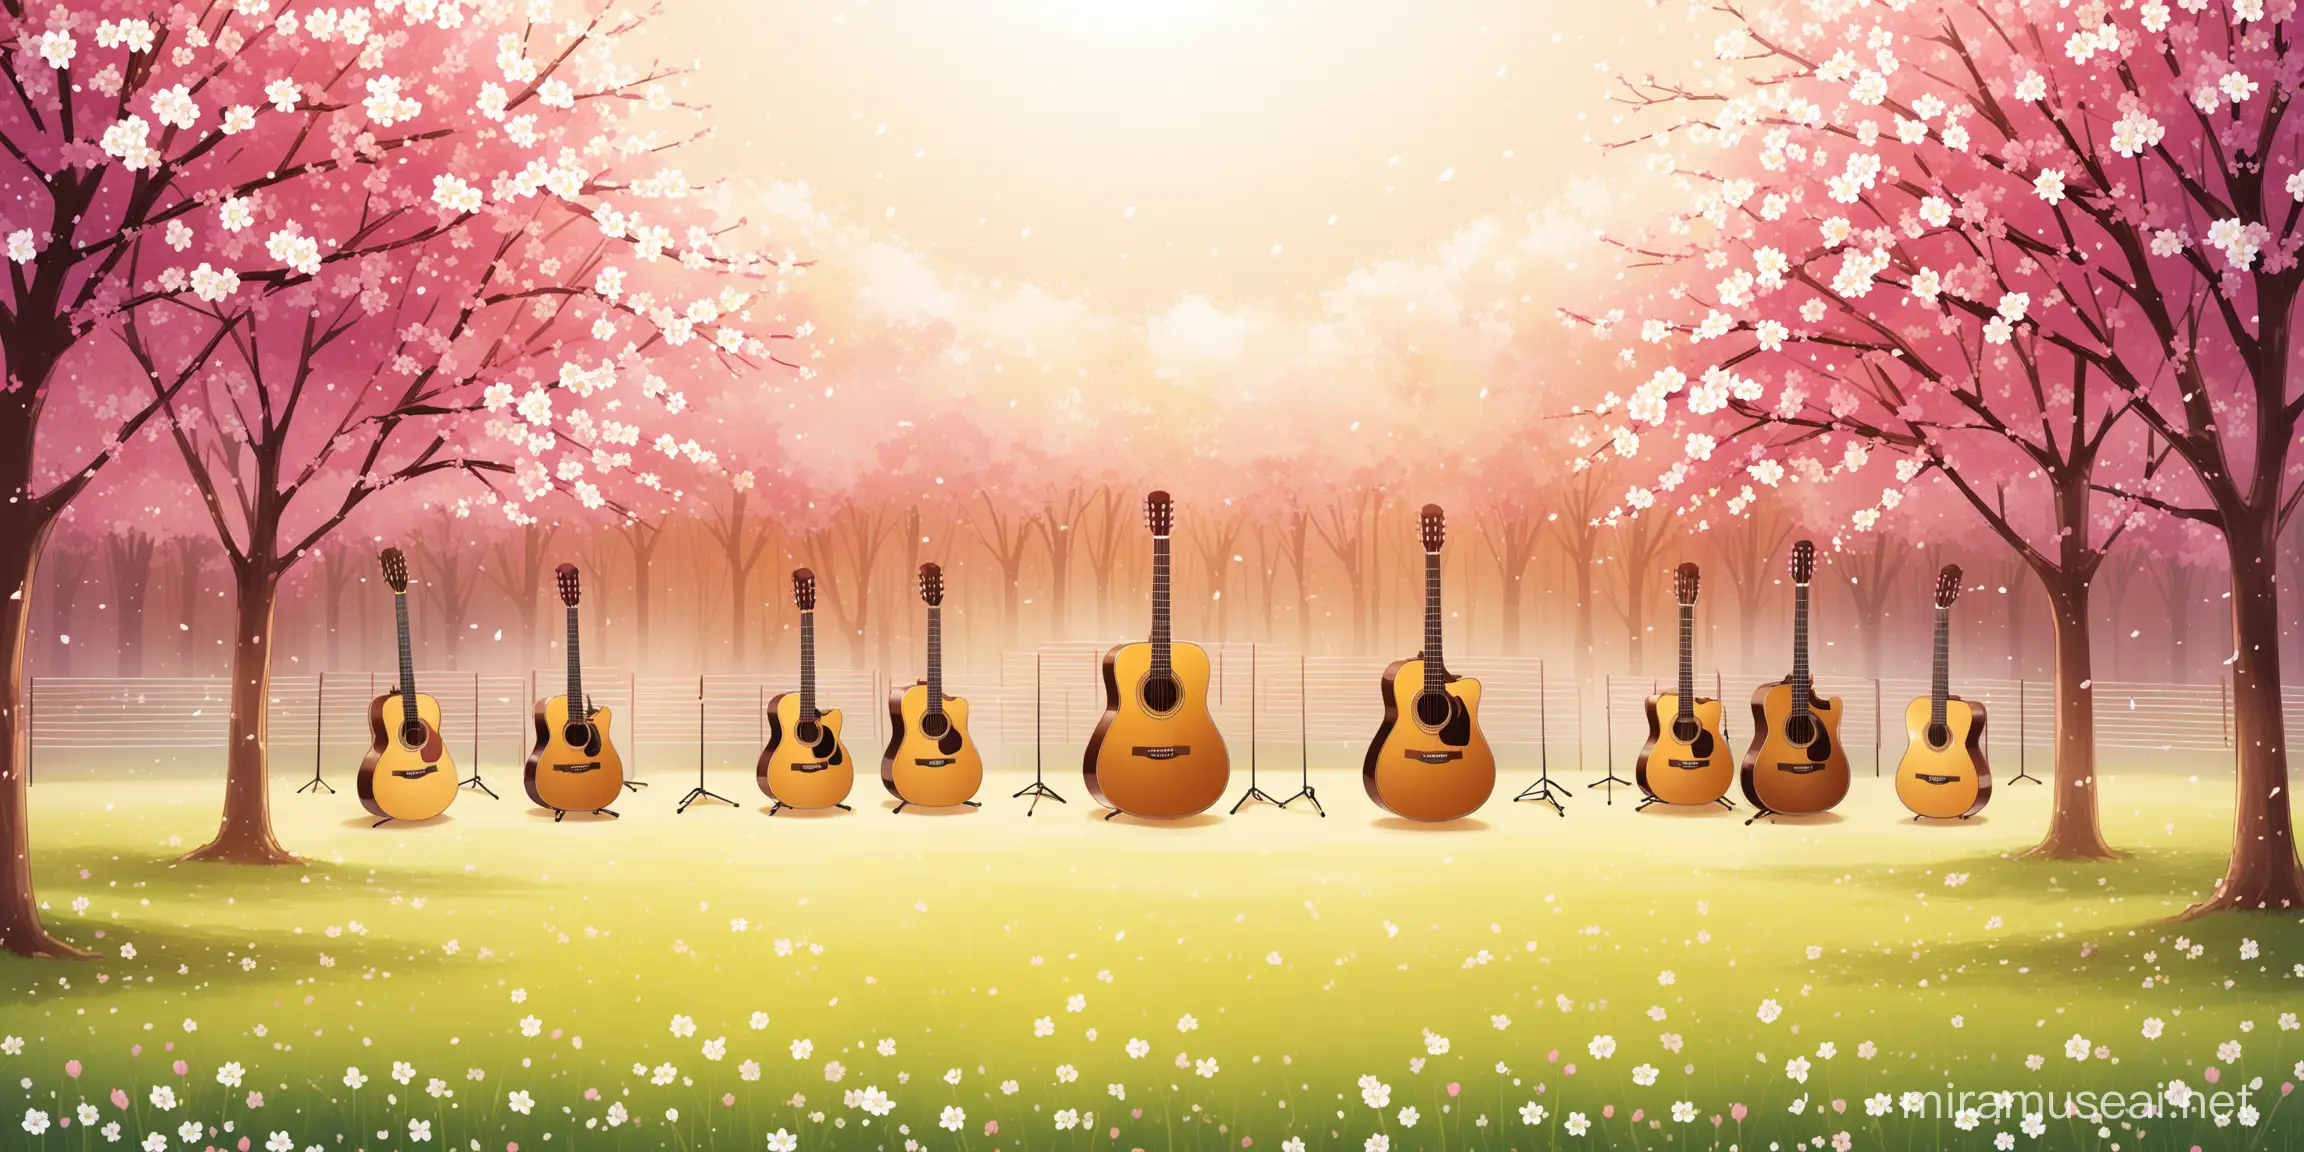 poster of a springtime guitar concert at music school with no titles or any writings